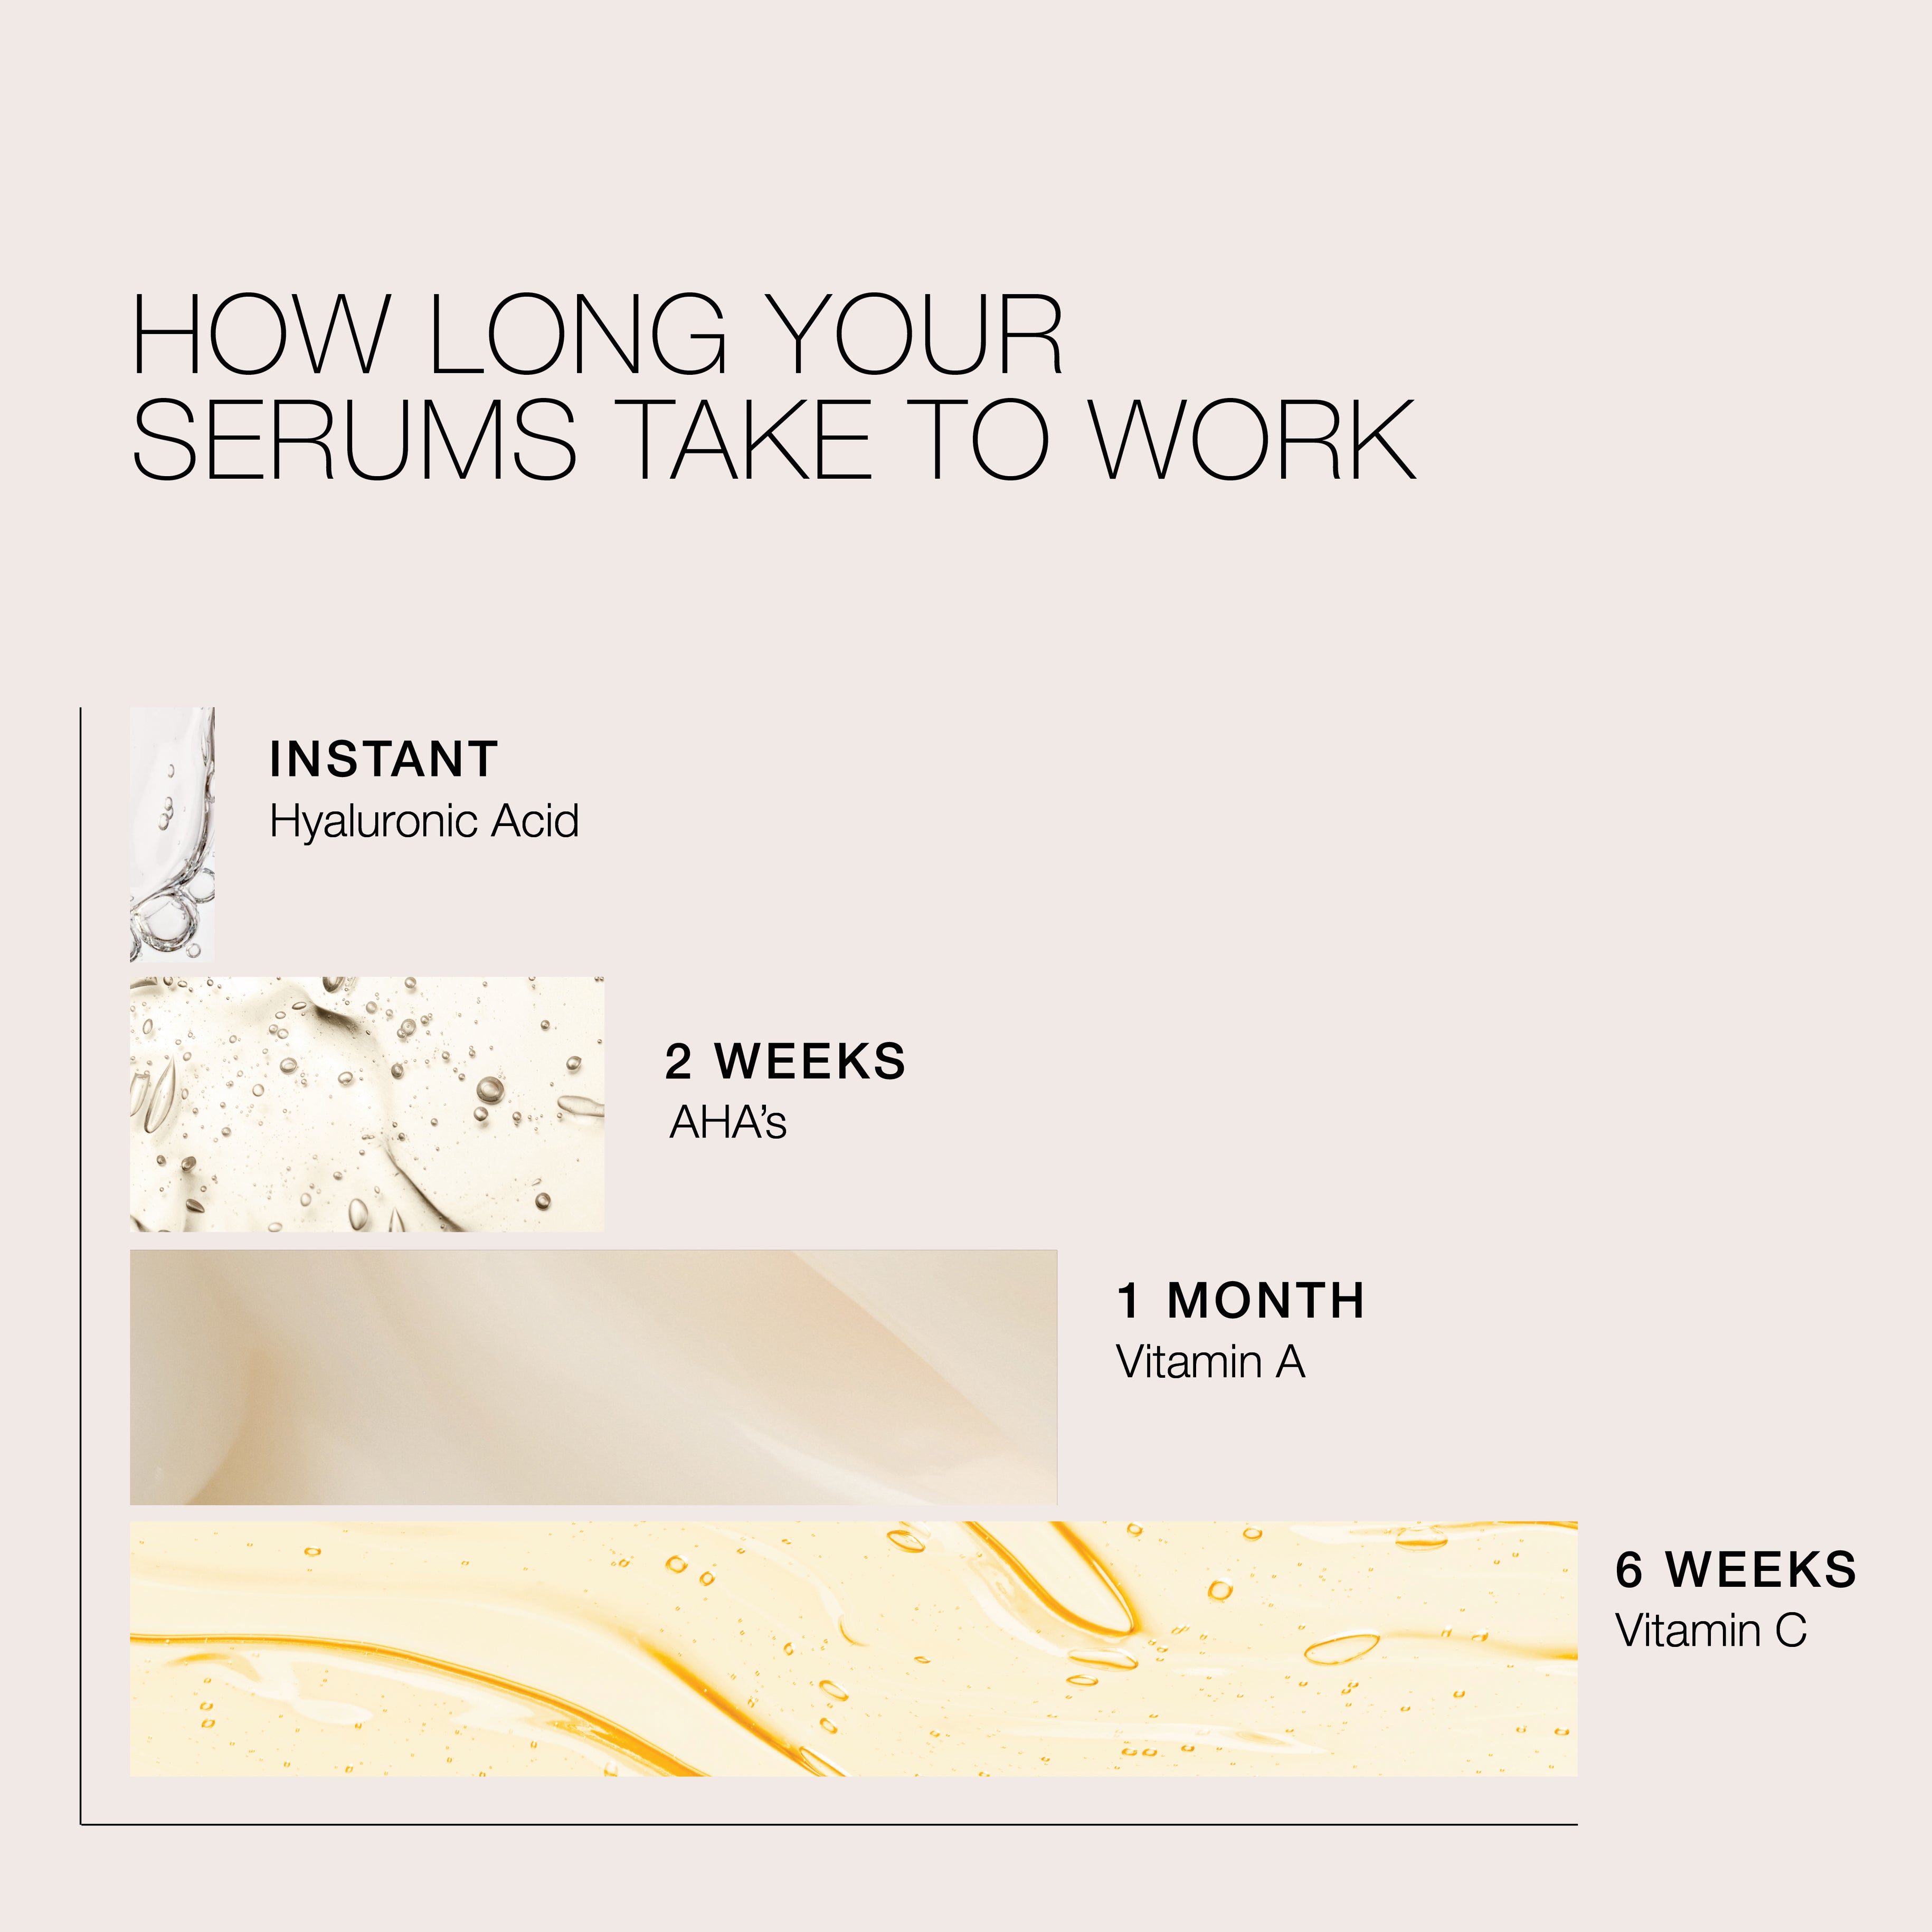 How long do your serums take to work